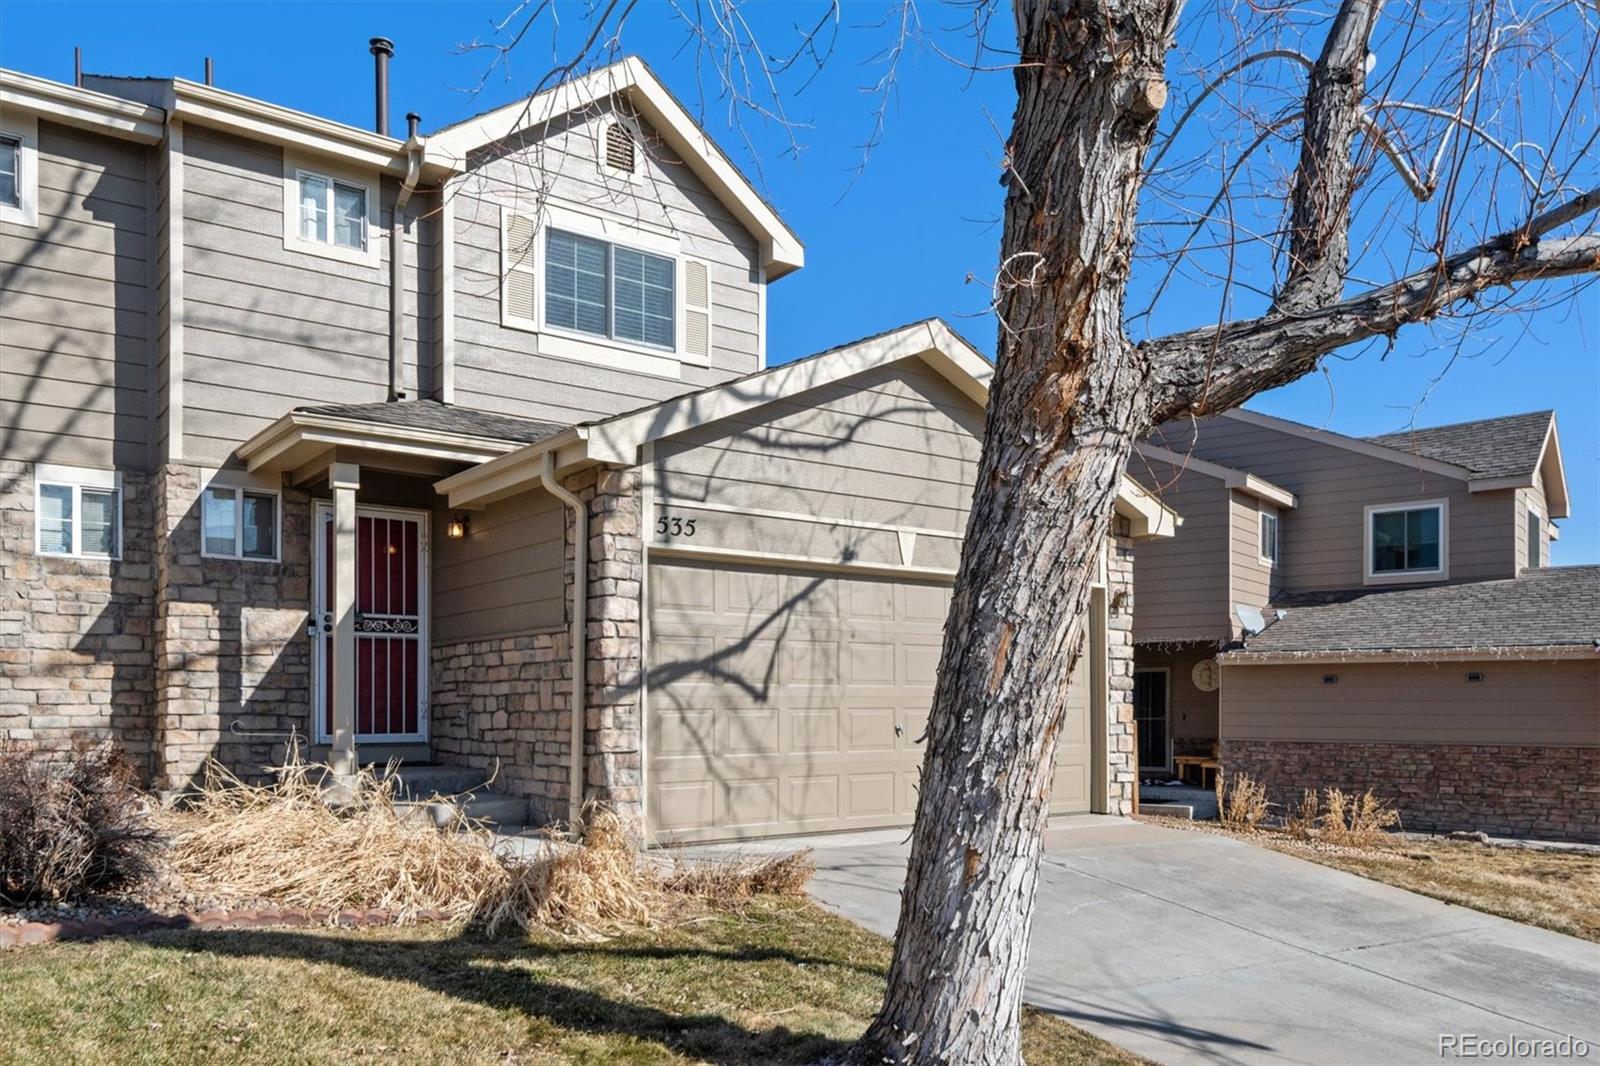 Report Image for 535 W 91st Drive,Thornton, Colorado